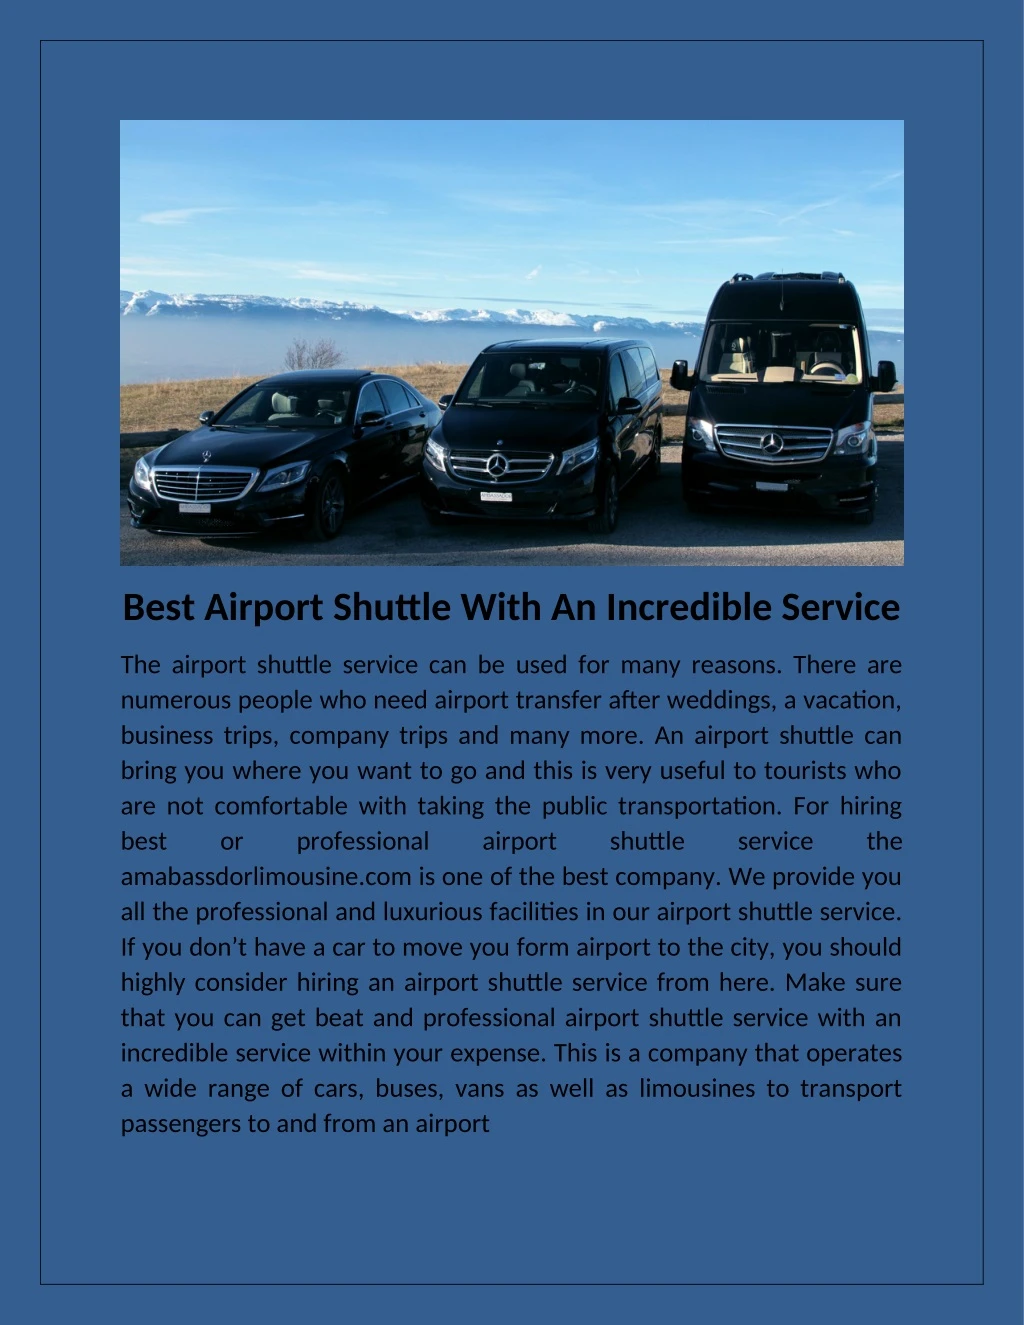 best airport shuttle with an incredible service